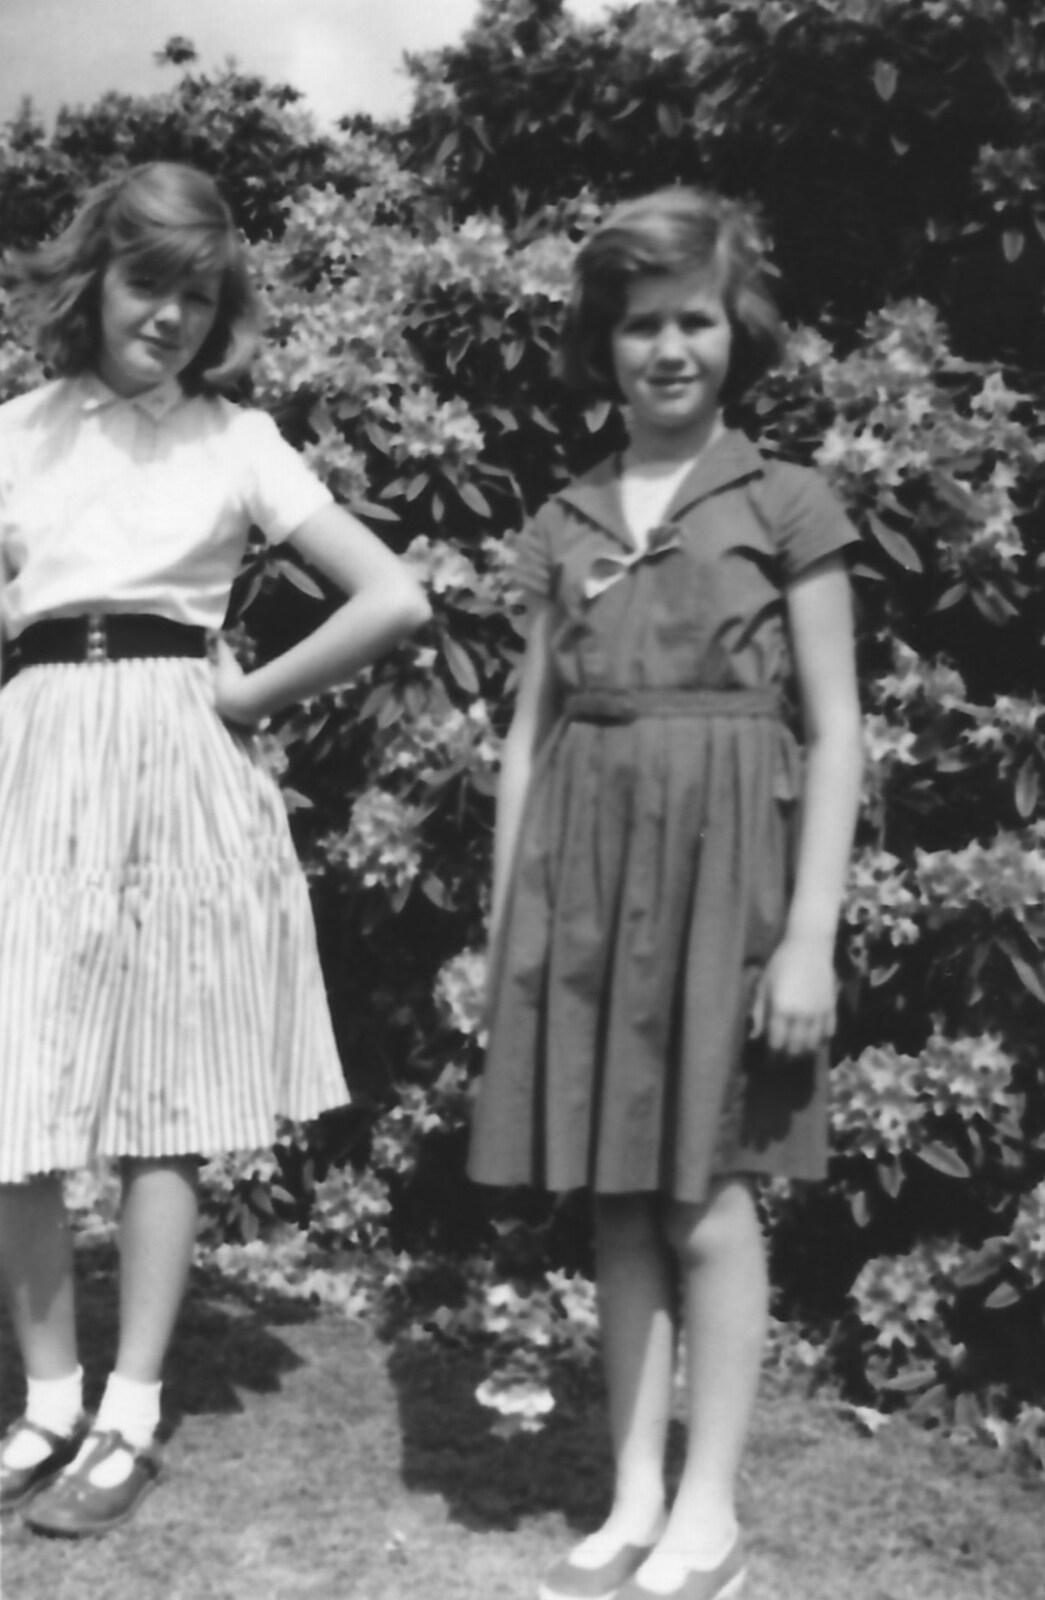 Family History: The 1940s and 1950s - 24th January 2020: Janet and Judith